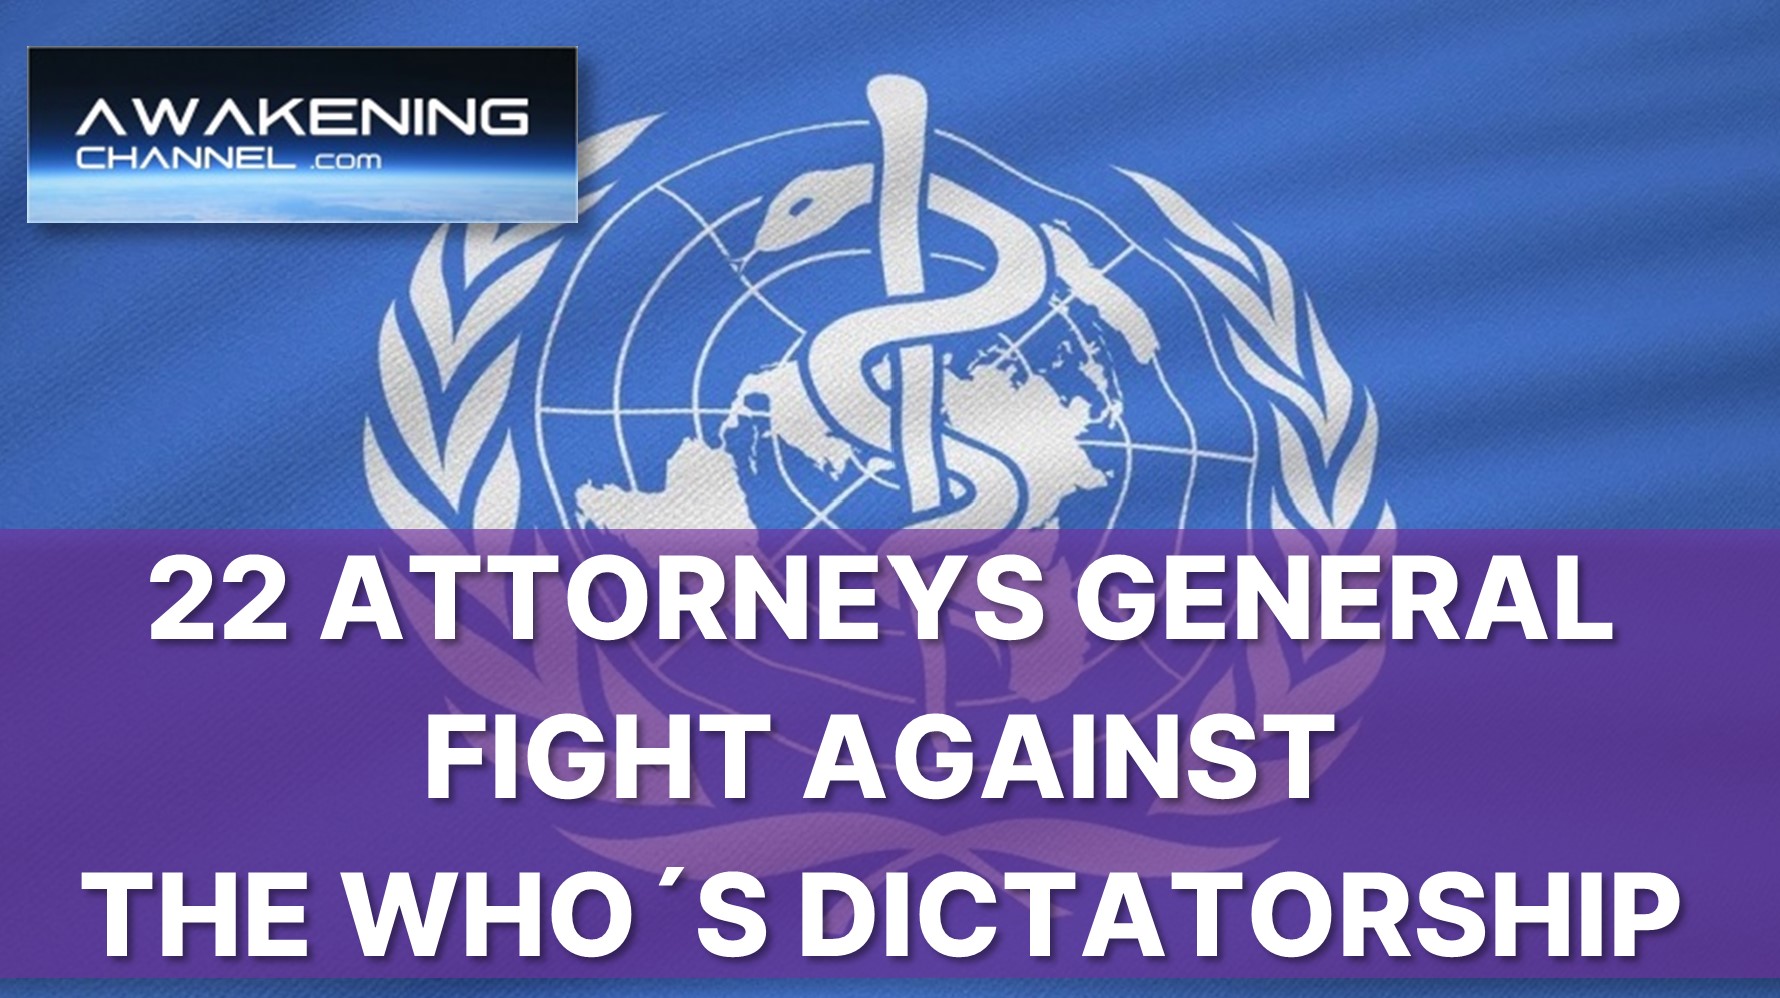 22 Attorneys General Oppose The WHO’s Dictatorship Within Their Respective States.